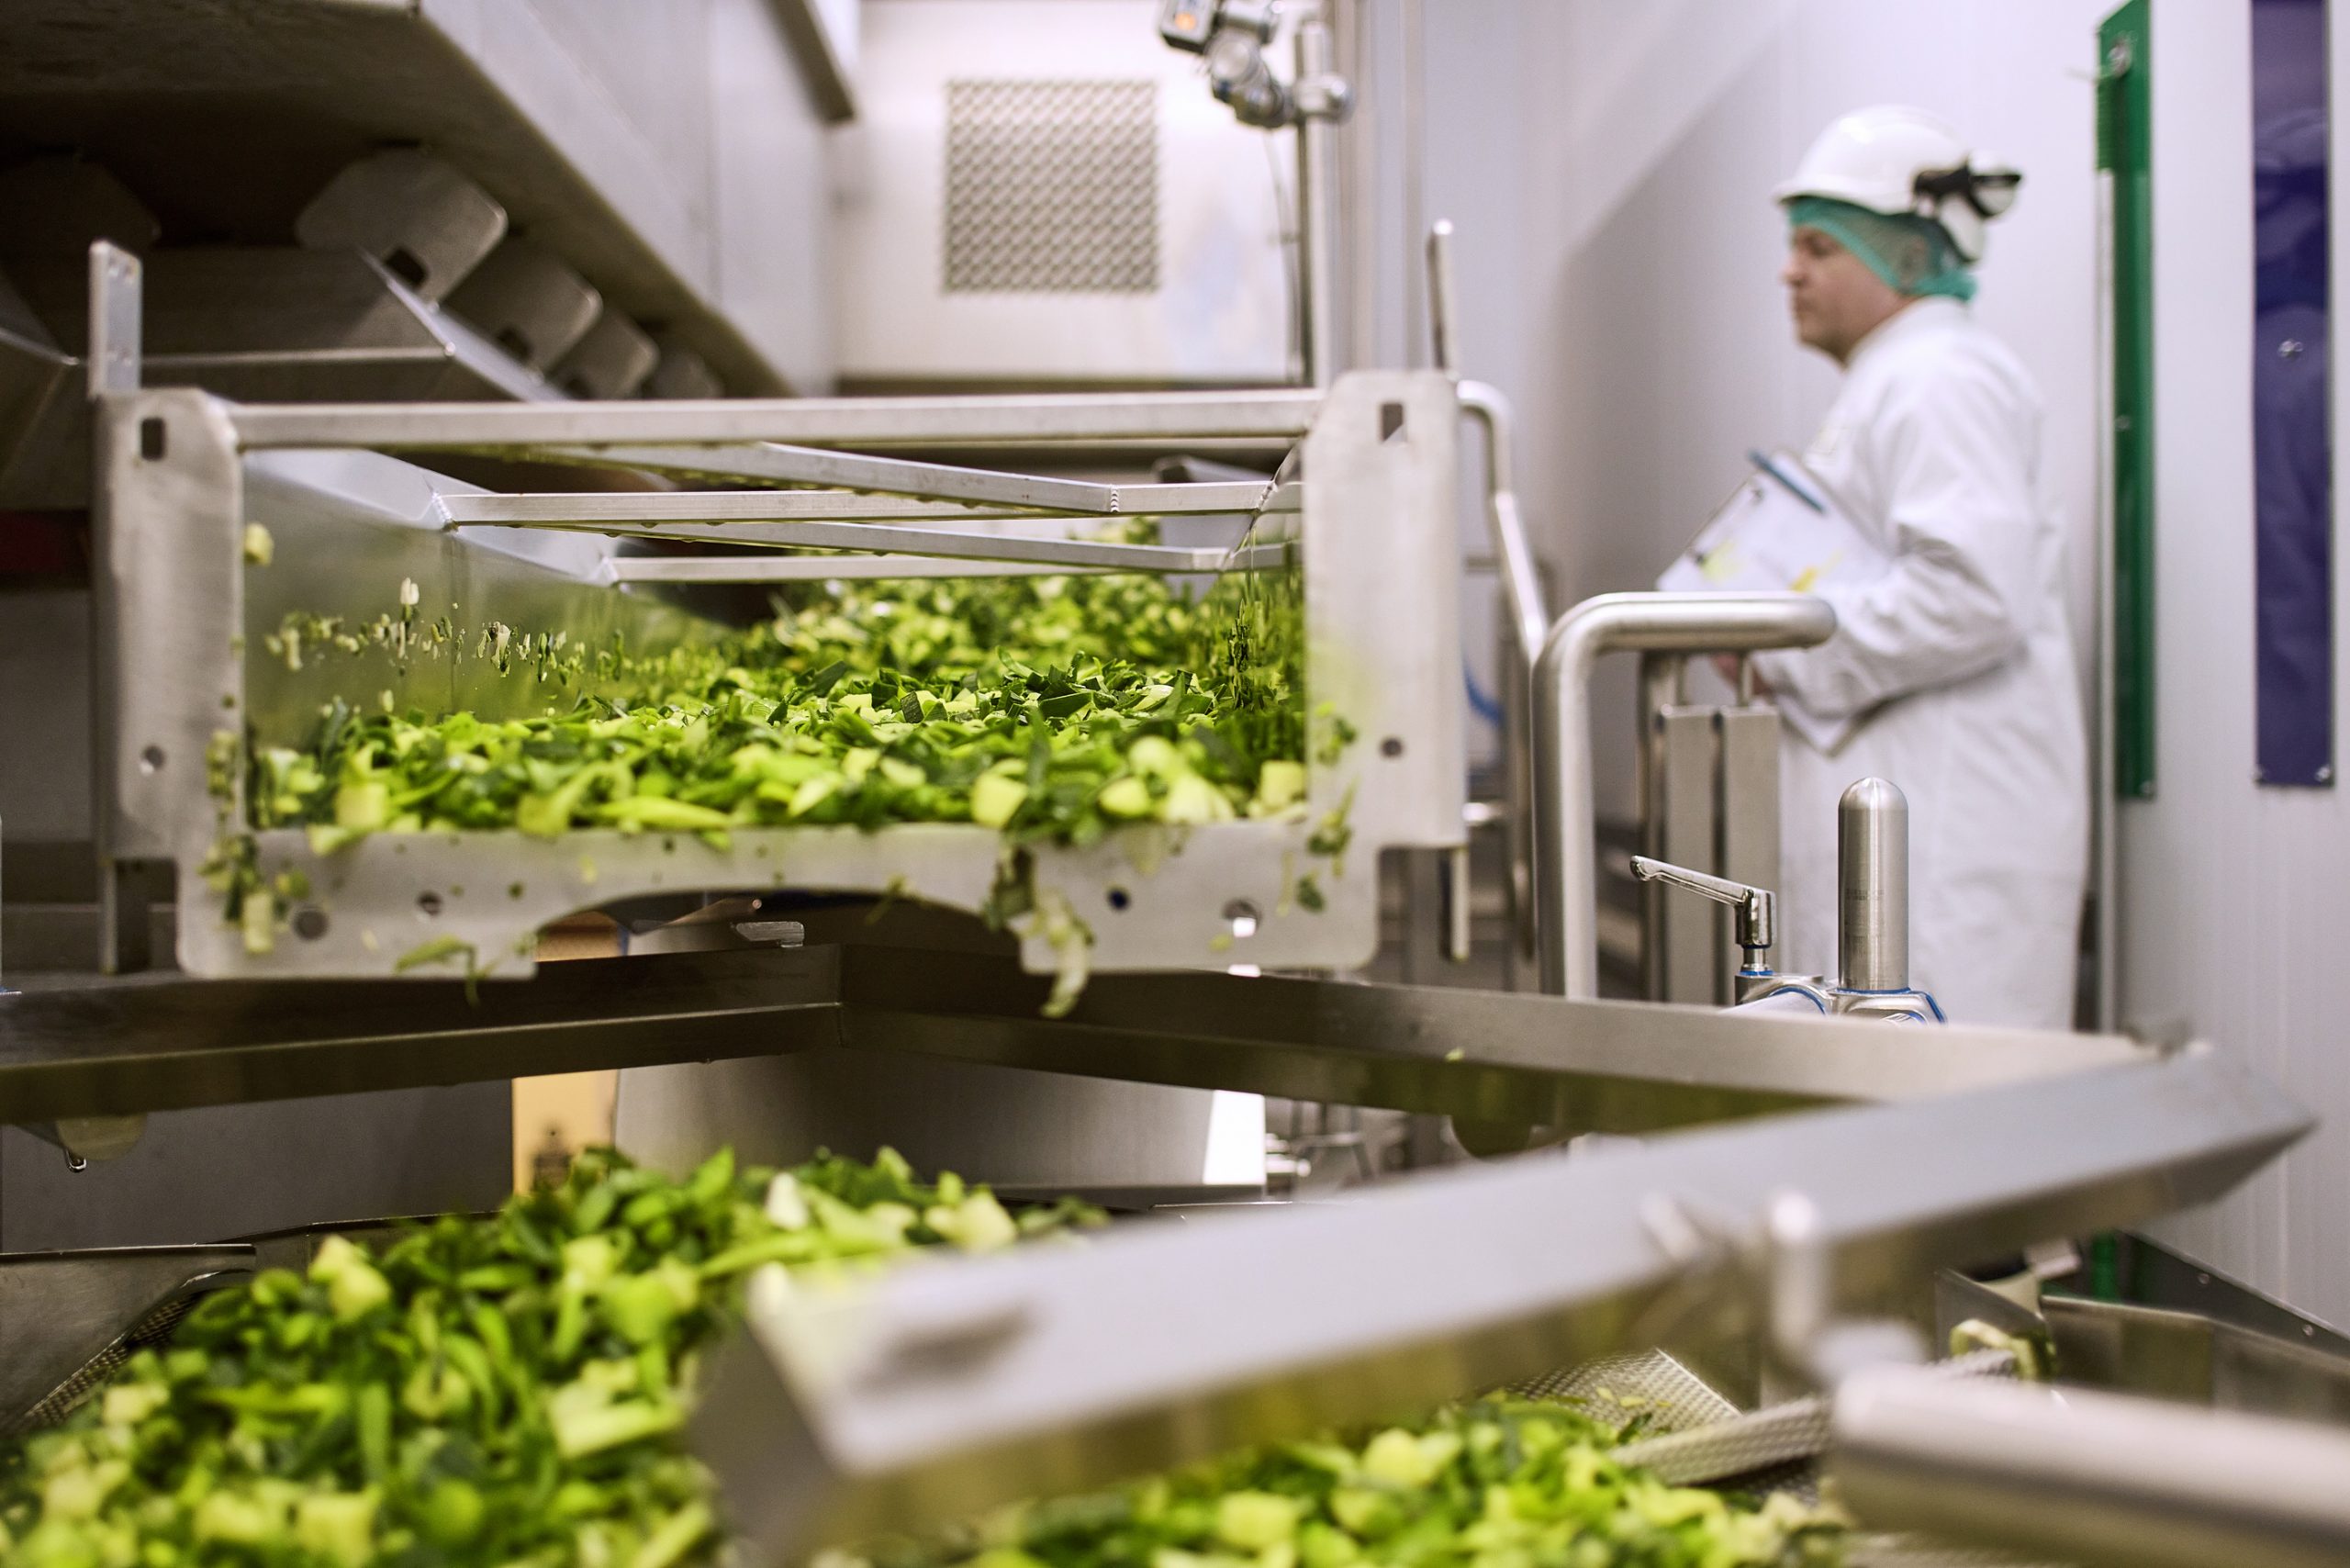 Vegetables being processed in the machines